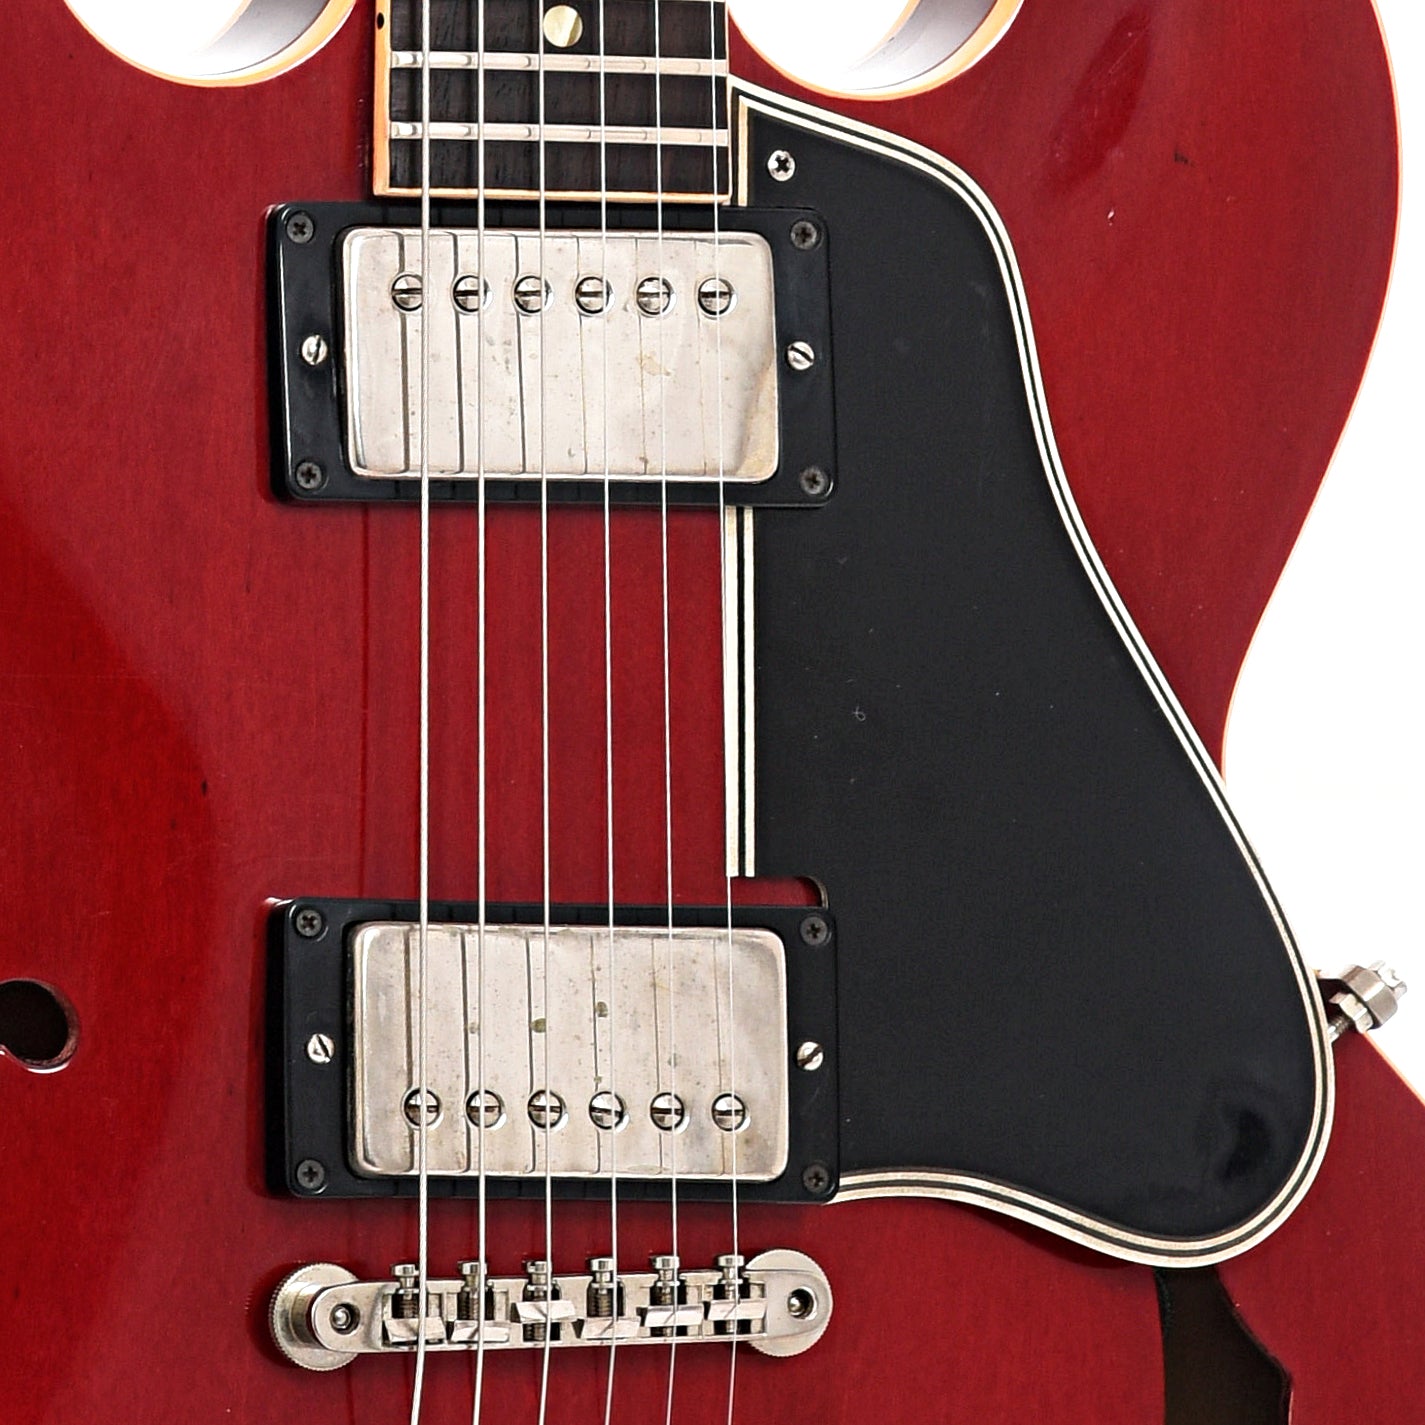 Picks of Gibson ES-335 Hollow Body Electric Guitar